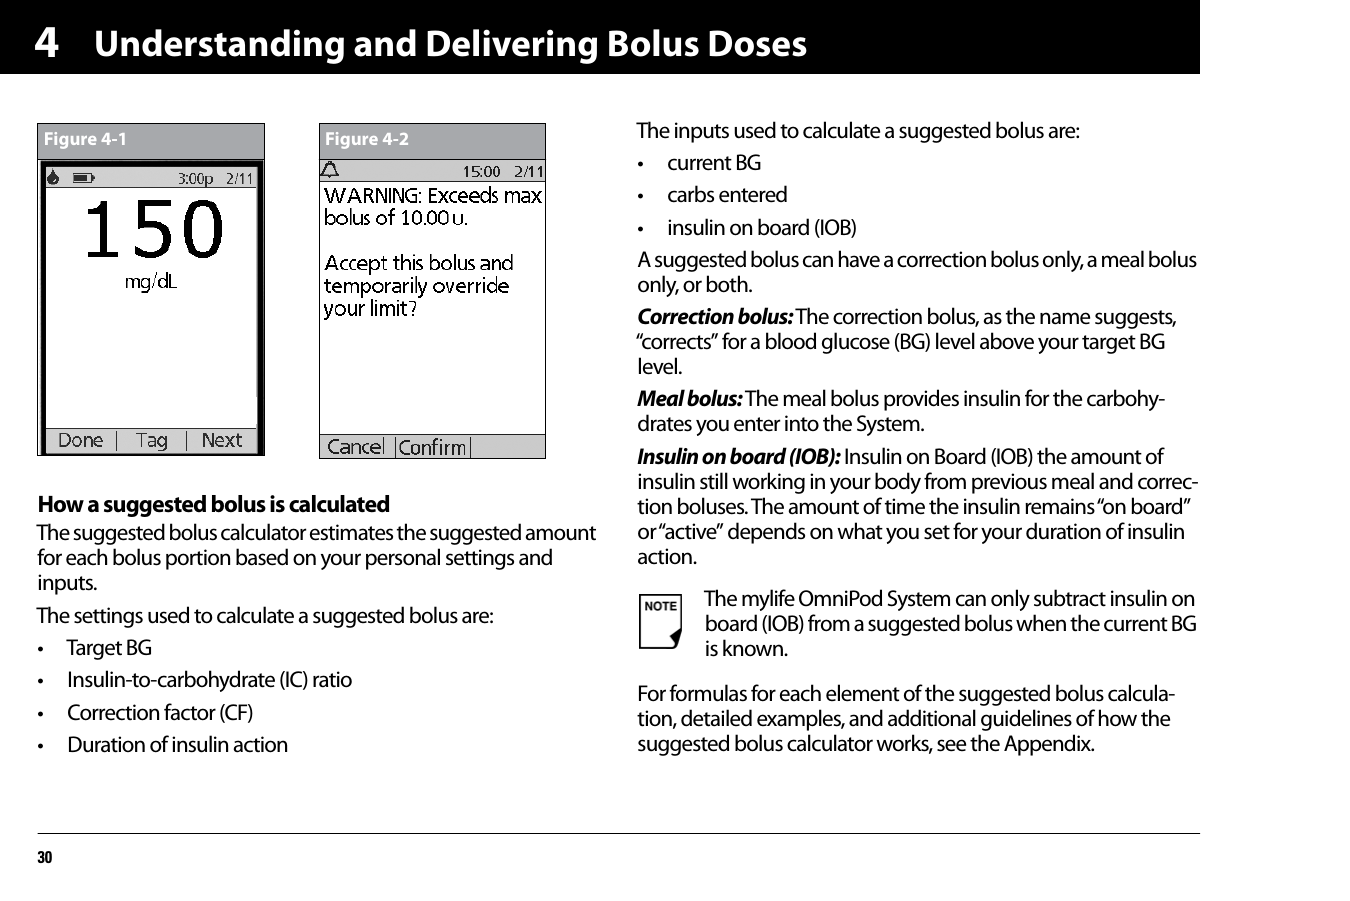 Understanding and Delivering Bolus Doses304How a suggested bolus is calculatedThe suggested bolus calculator estimates the suggested amount for each bolus portion based on your personal settings and inputs.The settings used to calculate a suggested bolus are:• Target BG• Insulin-to-carbohydrate (IC) ratio• Correction factor (CF)• Duration of insulin actionThe inputs used to calculate a suggested bolus are:• current BG• carbs entered• insulin on board (IOB)A suggested bolus can have a correction bolus only, a meal bolus only, or both.Correction bolus: The correction bolus, as the name suggests, “corrects” for a blood glucose (BG) level above your target BG level.Meal bolus: The meal bolus provides insulin for the carbohy-drates you enter into the System.Insulin on board (IOB): Insulin on Board (IOB) the amount of insulin still working in your body from previous meal and correc-tion boluses. The amount of time the insulin remains “on board” or “active” depends on what you set for your duration of insulin action.For formulas for each element of the suggested bolus calcula-tion, detailed examples, and additional guidelines of how the suggested bolus calculator works, see the Appendix. Figure 4-1 Figure 4-2The mylife OmniPod System can only subtract insulin on board (IOB) from a suggested bolus when the current BG is known.